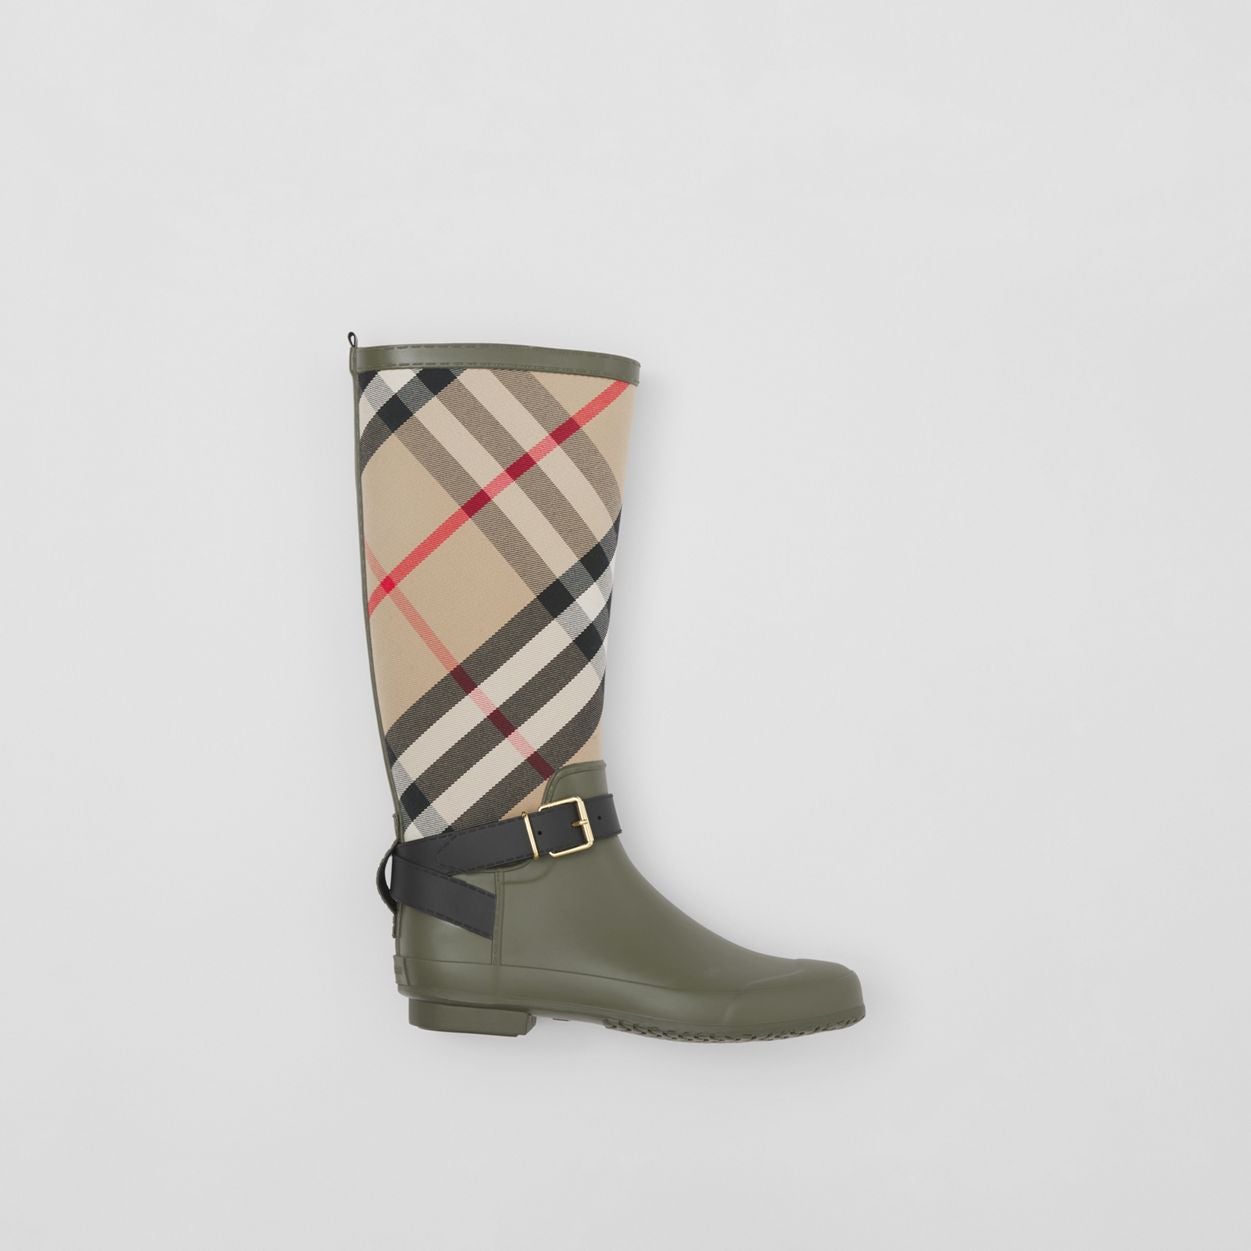 Can You Stand The Rain? With These 15 Luxury Rubber Boots You Certainly ...